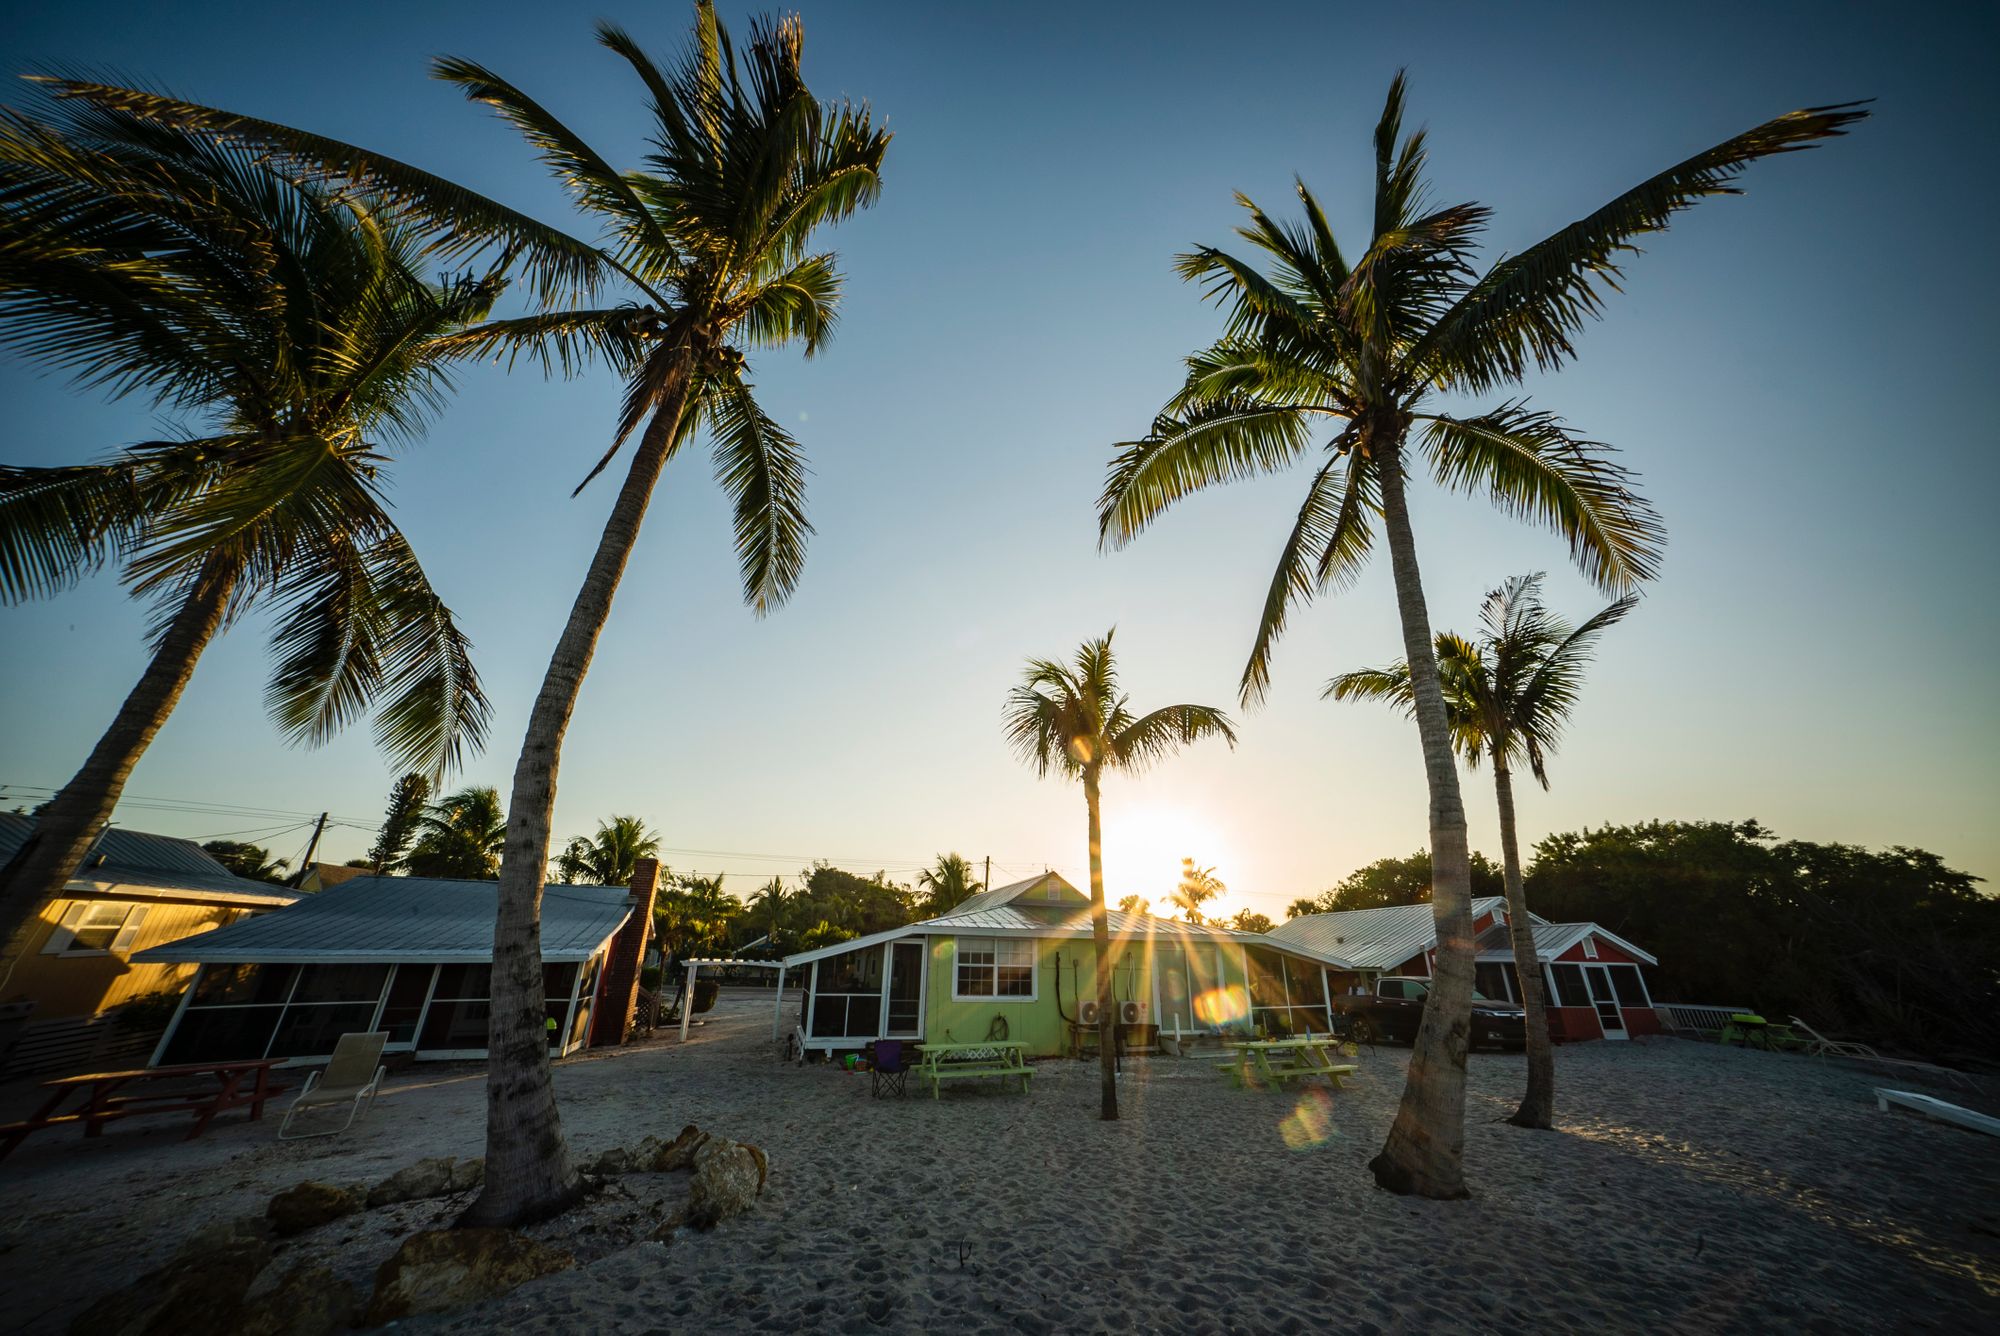 Places to stay on beachfront in Sanibel Florida